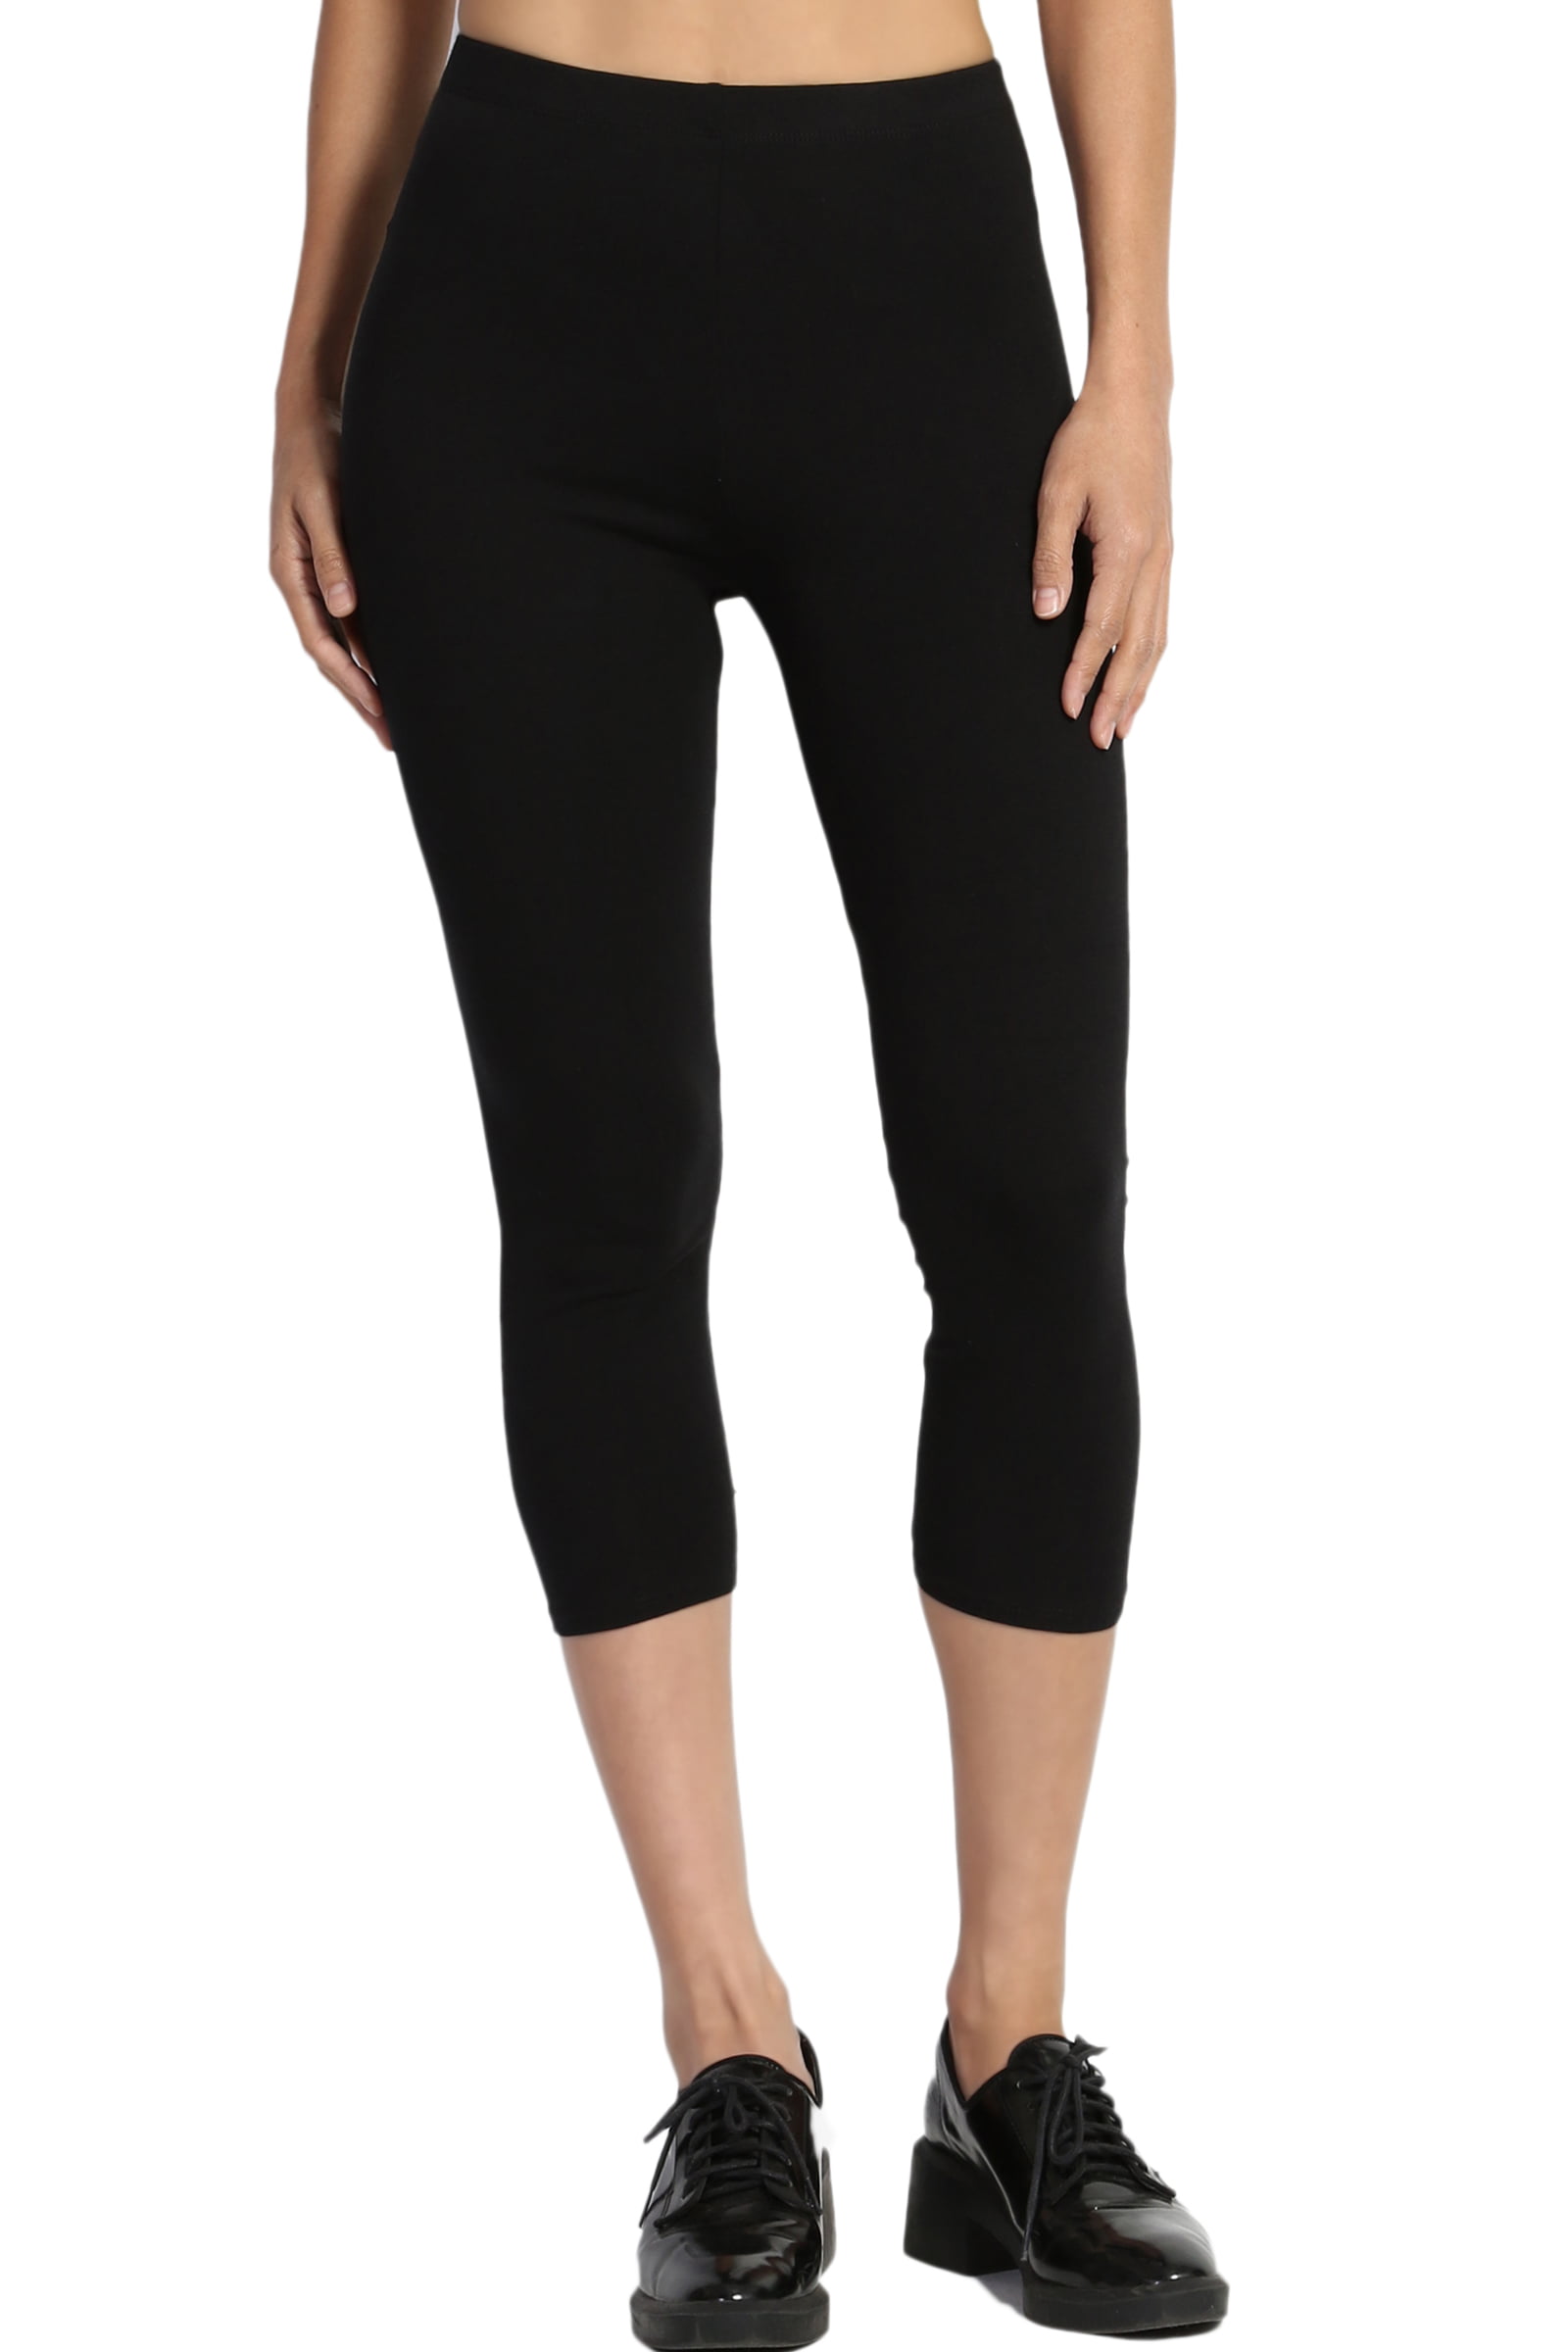 Spalding Women's High Waisted Crop Legging, Deep Black, Small at   Women's Clothing store